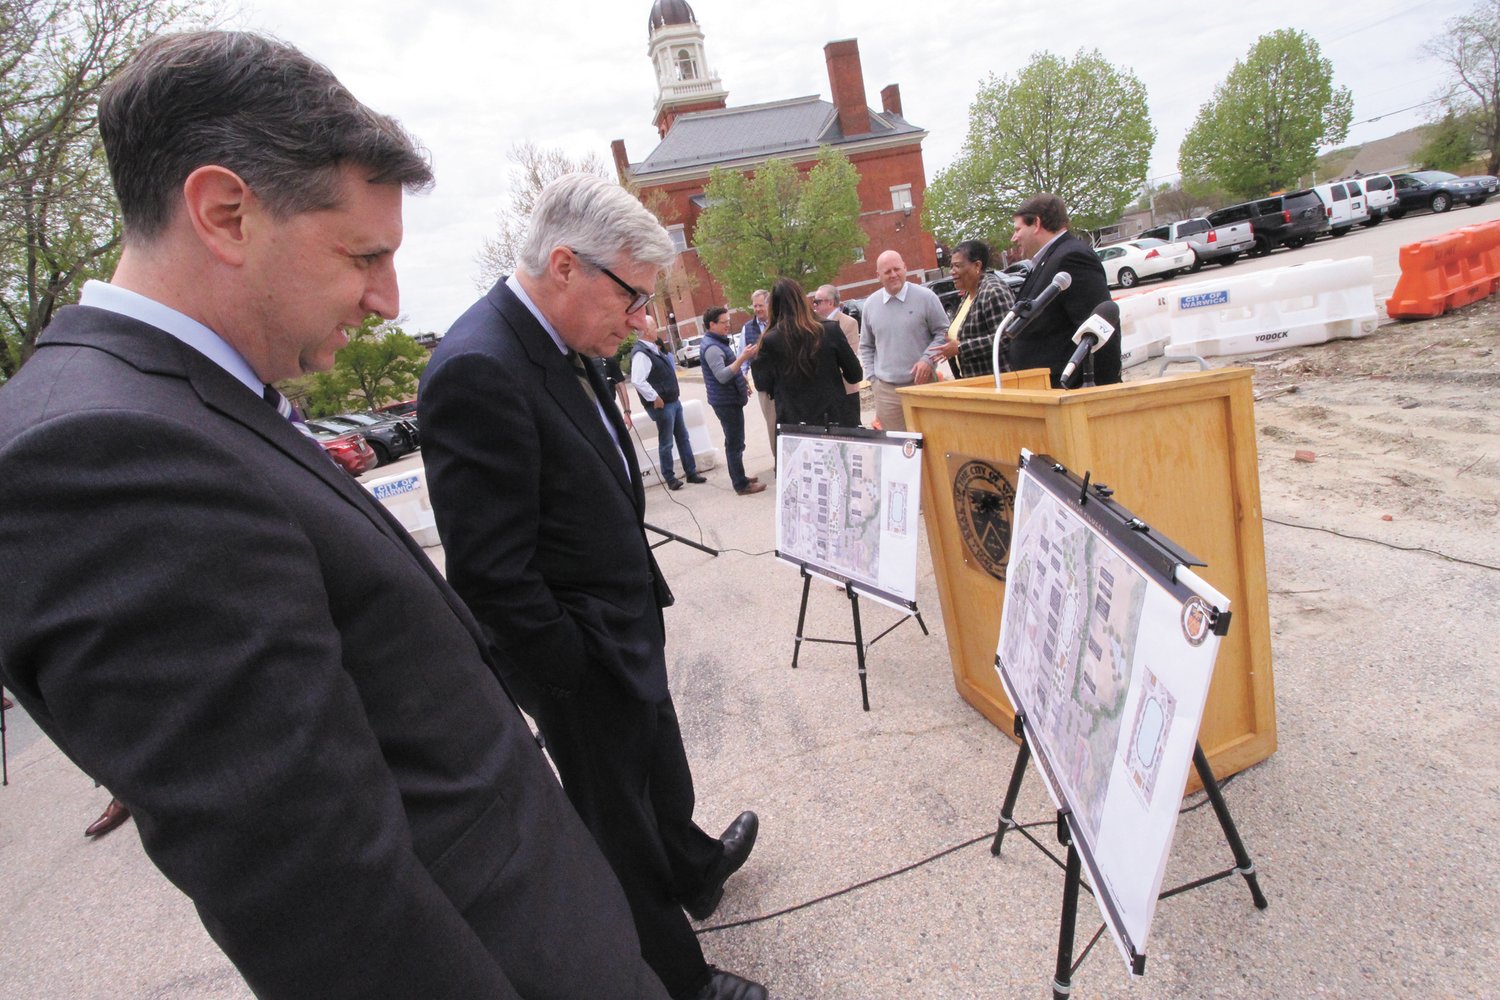 ALL IN THE PLANS: Senator Sheldon Whitehouse and State Treasurer Seth Magaziner look over plans for the proposed Warwick Plaza behind Warwick City Hall.